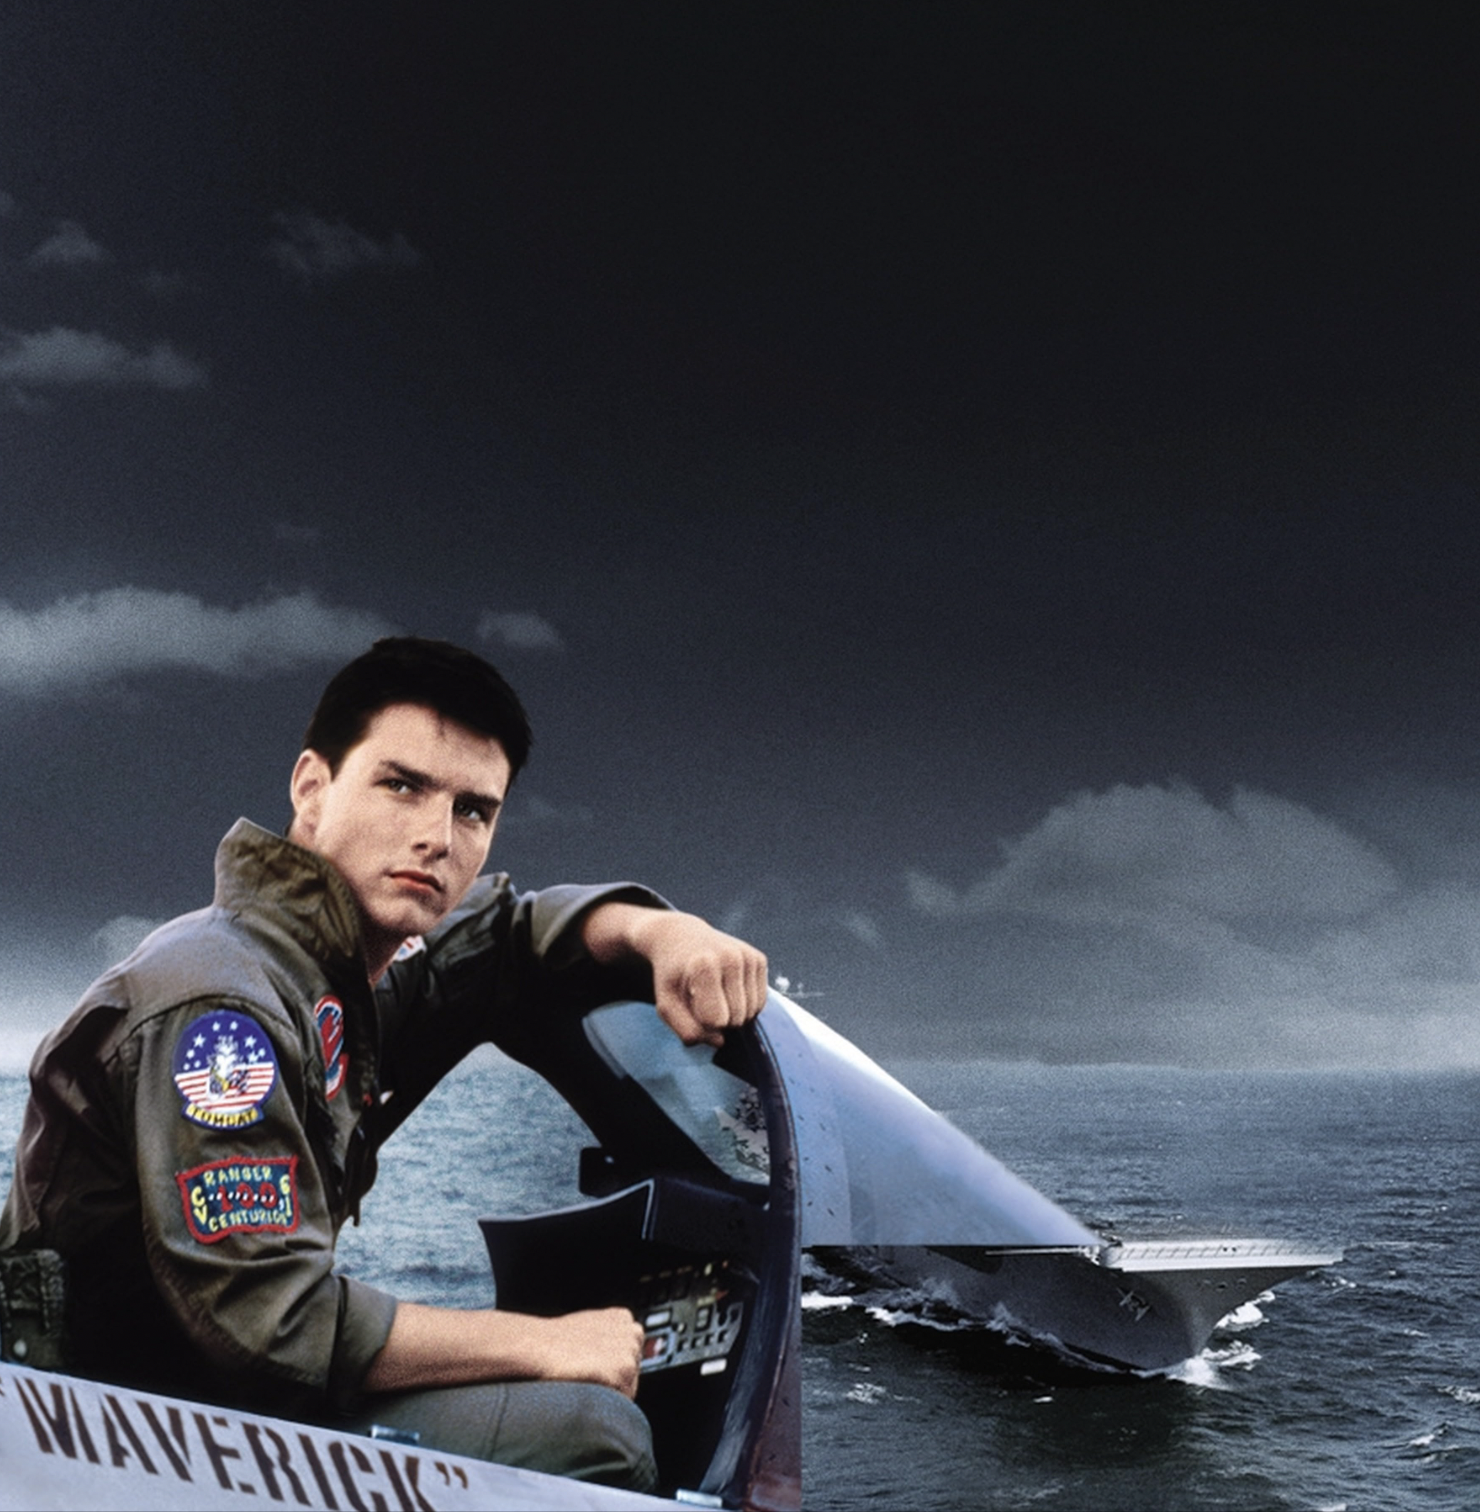 <p>In the 1986 blockbuster film "Top Gun," Tom Cruise portrays the reckless Navy pilot Maverick, who plays “dice with death.” But during production, Cruise, who was still new to the stunt game and had yet to break any bones, had a close brush with death himself.  During the filming of the heart-wrenching scene where the character "Goose," played by Anthony Edwards, tragically dies in an aborted mission, an actual accident occurred that almost cost Tom Cruise his life.</p><p>According to Barry Tubb, who portrayed "Wolfman" in the film, Cruise came perilously close to death on set. While shooting a scene where Cruise's character, Maverick, cradles Goose's body in the ocean, waiting for rescue, Cruise was unaware that his parachute had begun filling with water.</p><p>“Cruise came as close to dying as anybody on a set I’ve ever seen,” <a href="https://nypost.com/2011/08/28/tom-cruises-danger-zone/">said </a>co-star Barry Tubb. "They were refilling the camera or something, and luckily, one of the frogmen in the chopper saw his chute ballooning out. He jumped in and cut Cruise loose right before he sank. They would have never found him. He would have been at the bottom of the ocean."</p>